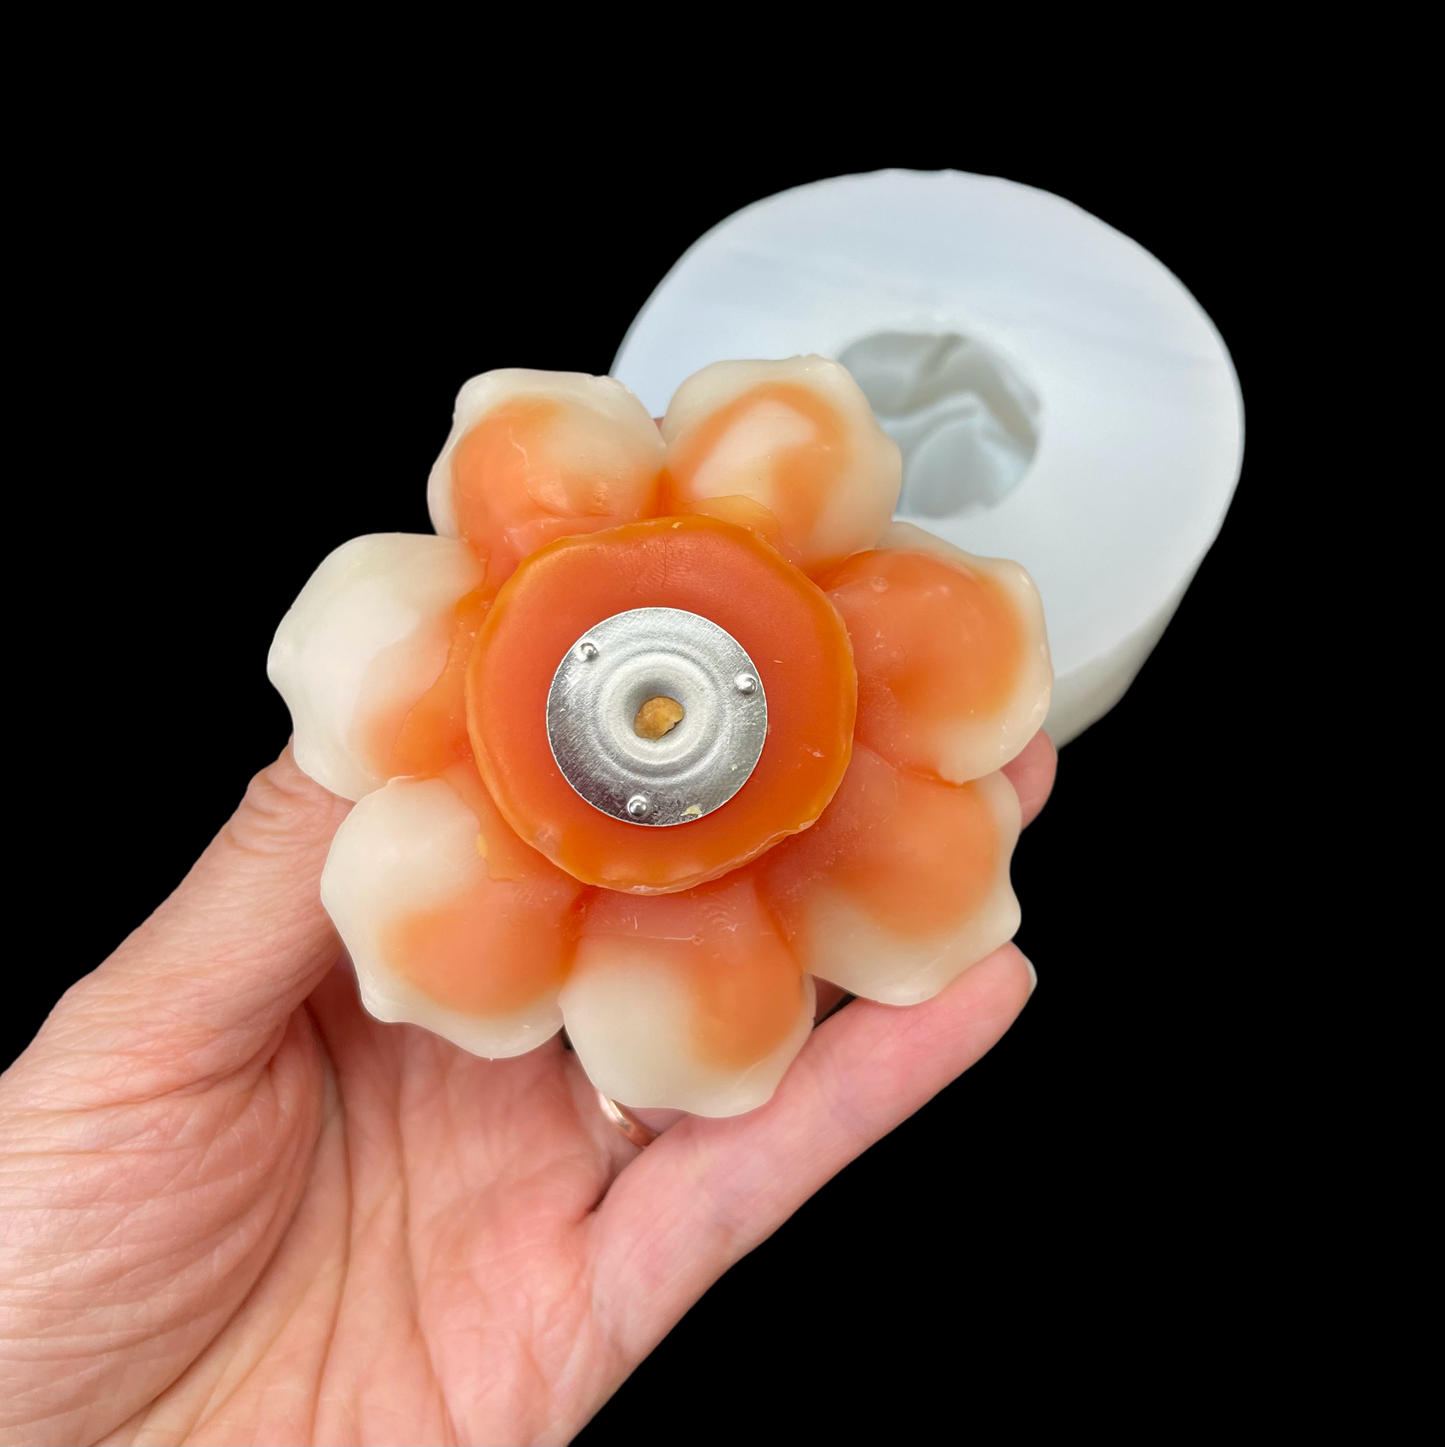 3D silicone floating flower mold - 3” - rose flower mold - beeswax candle mold - soap resin mold